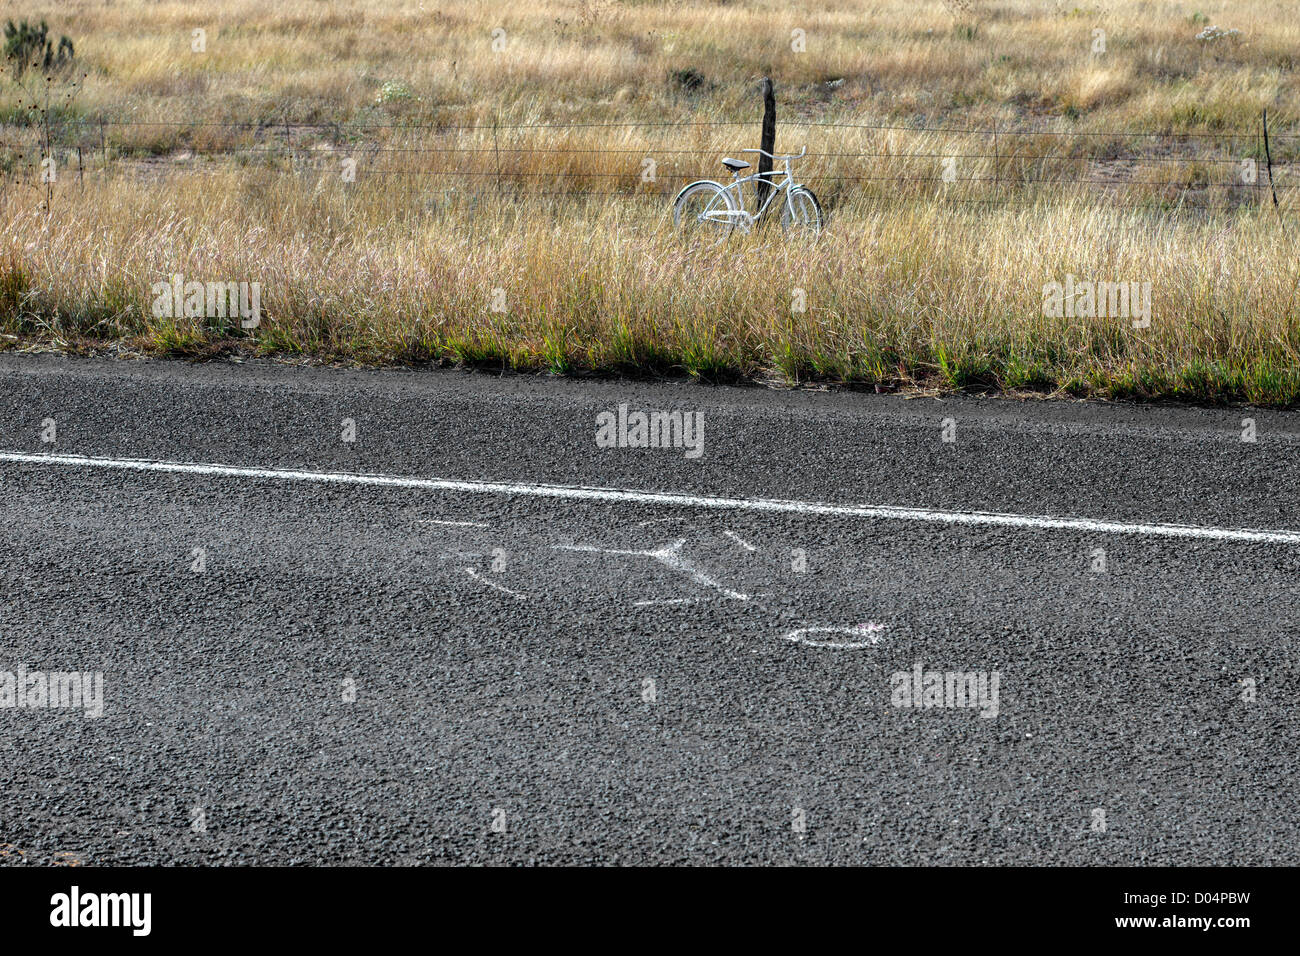 Forensic marks on a road and white bicycle called a White Ghost Bike, symbol of a cyclist death in the USA, near Marathon, Texas Stock Photo